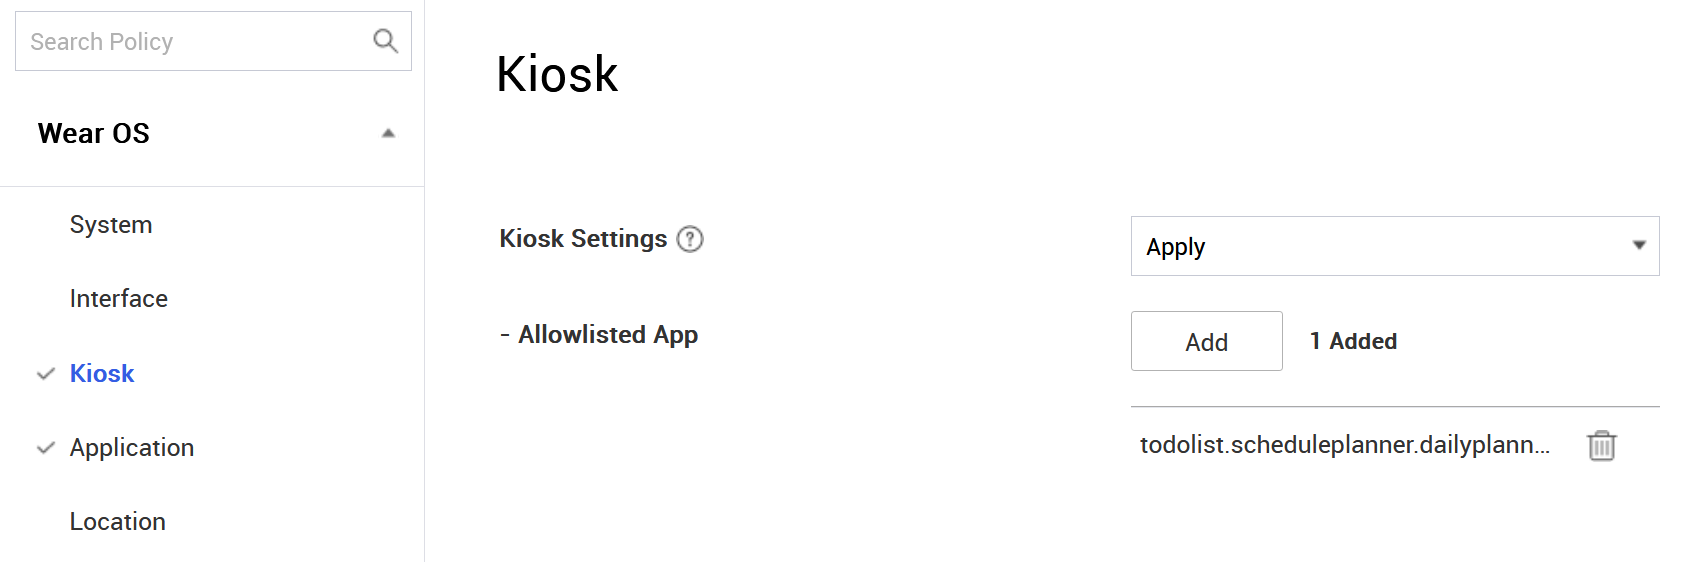 The Set Policy page with the Kiosk Settings policy set to allow an app.